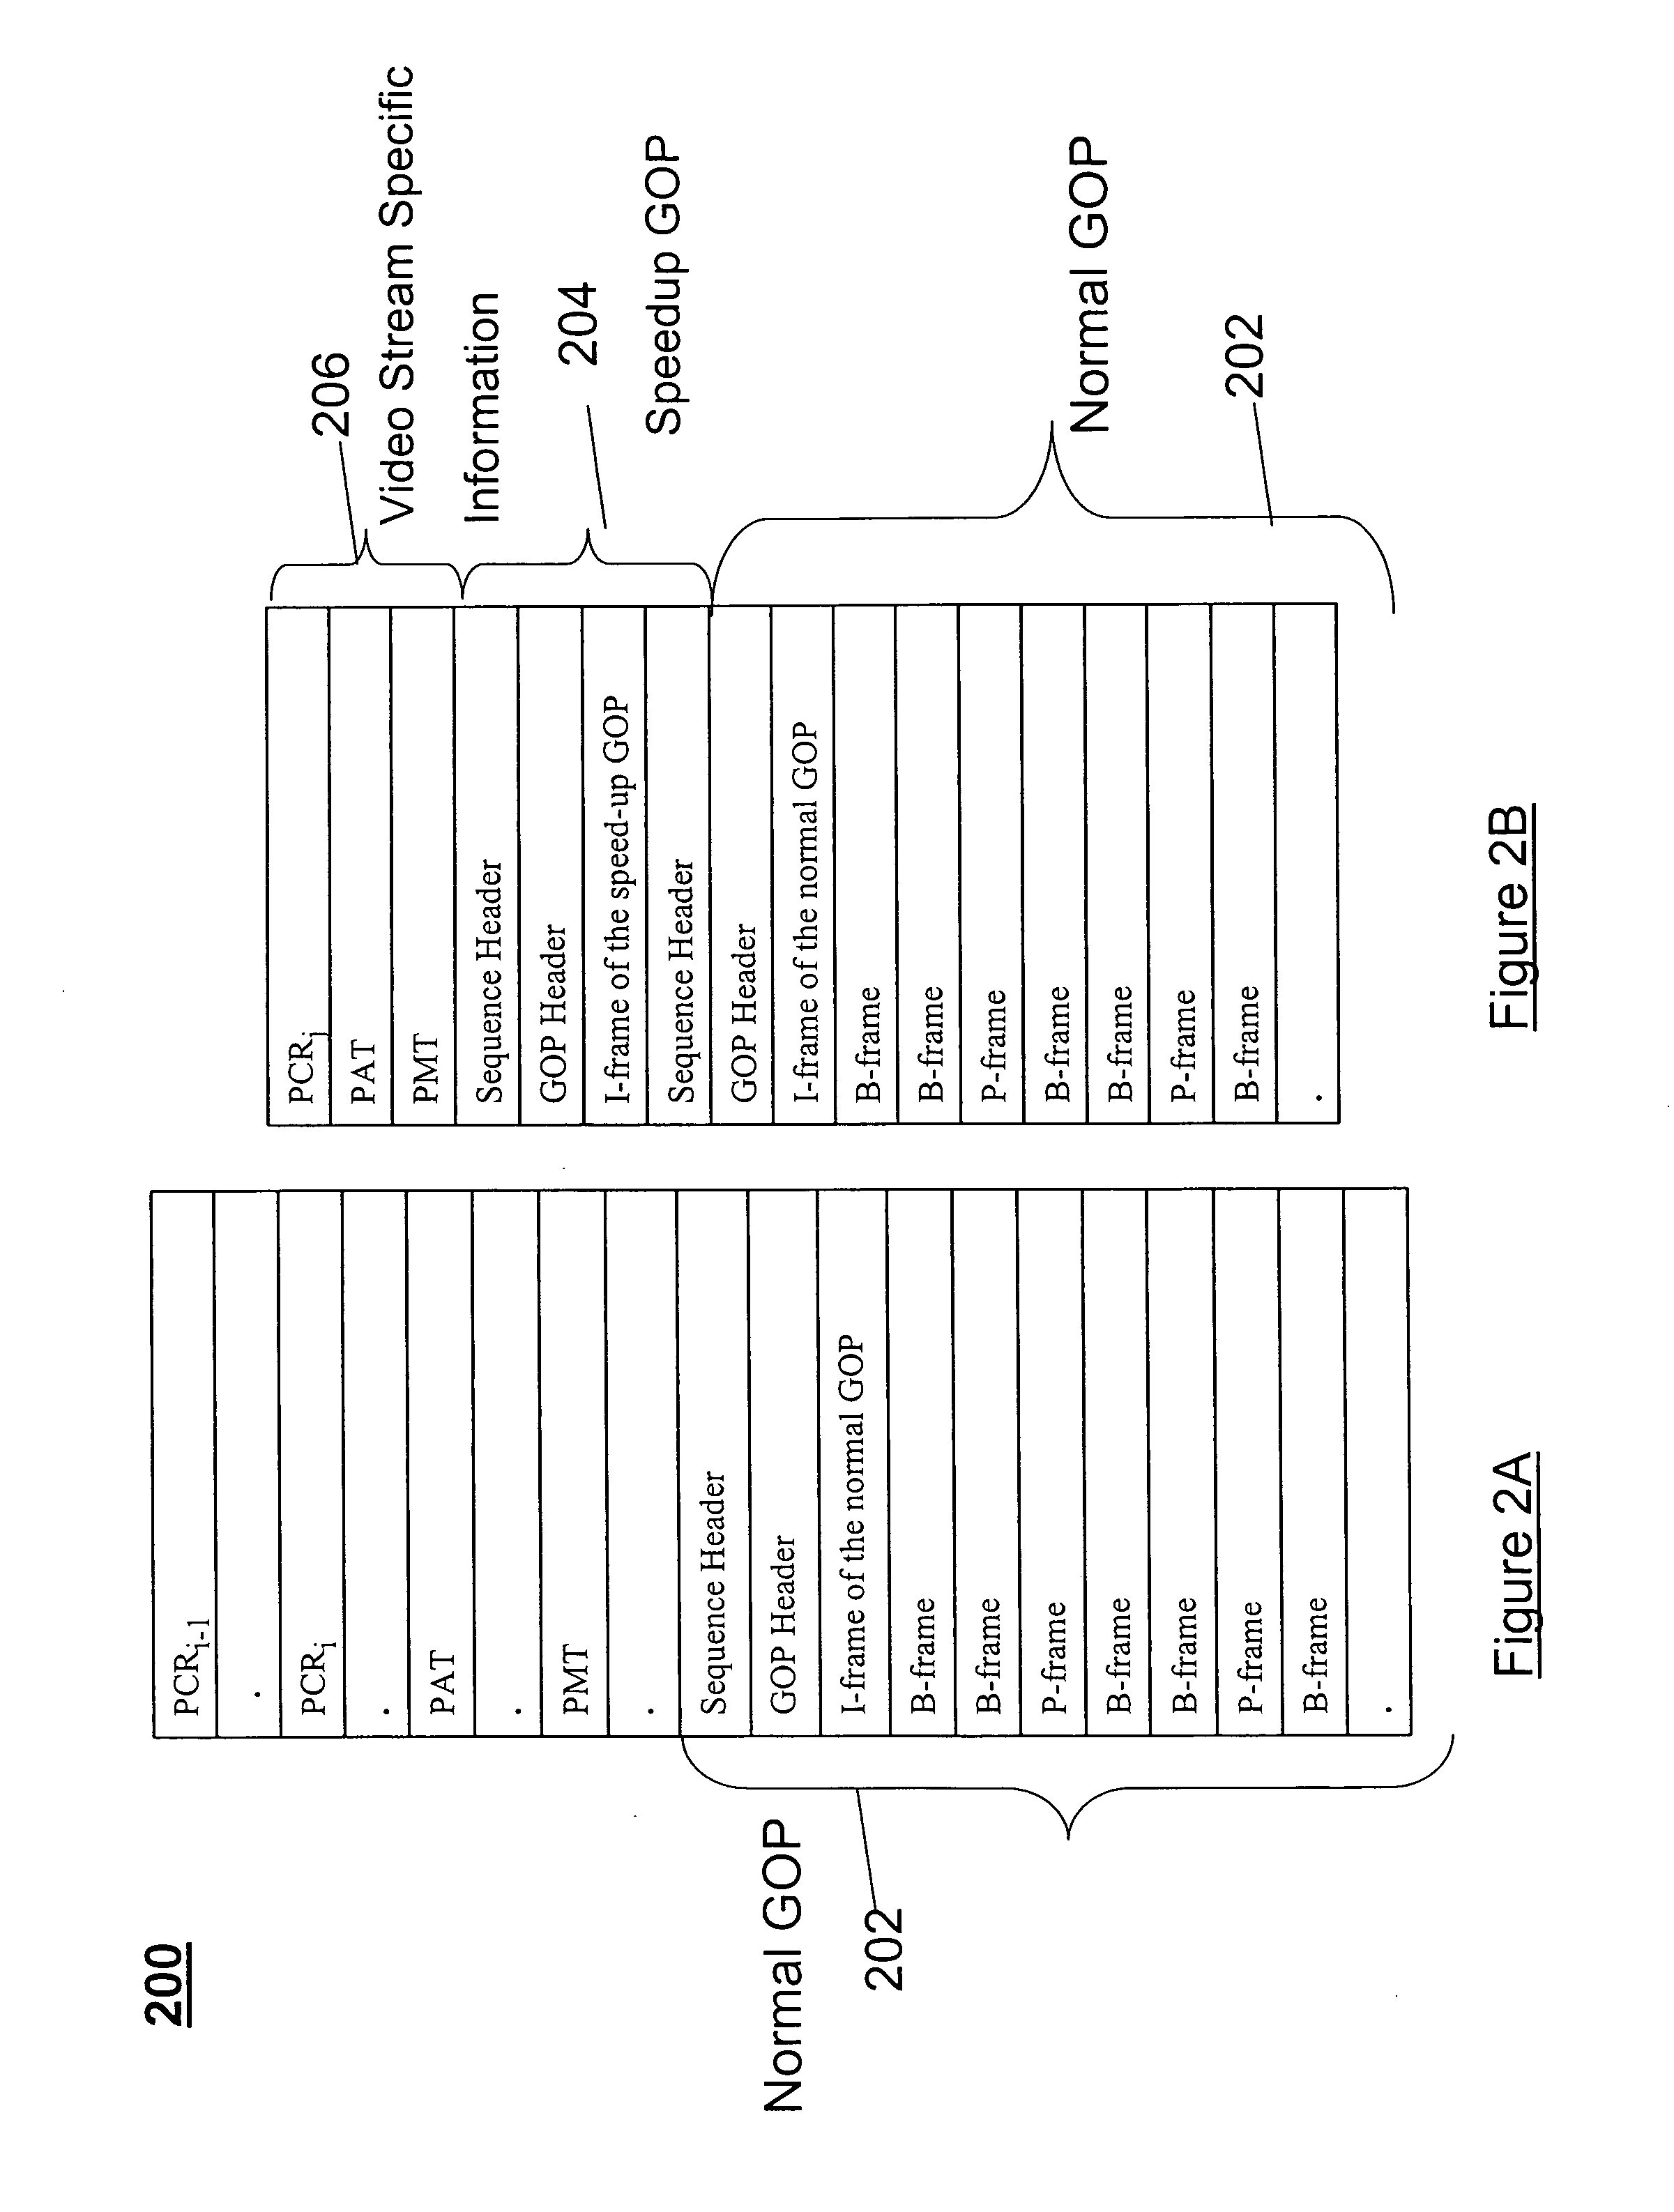 Method for reducing channel change startup delays for multicast digital video streams